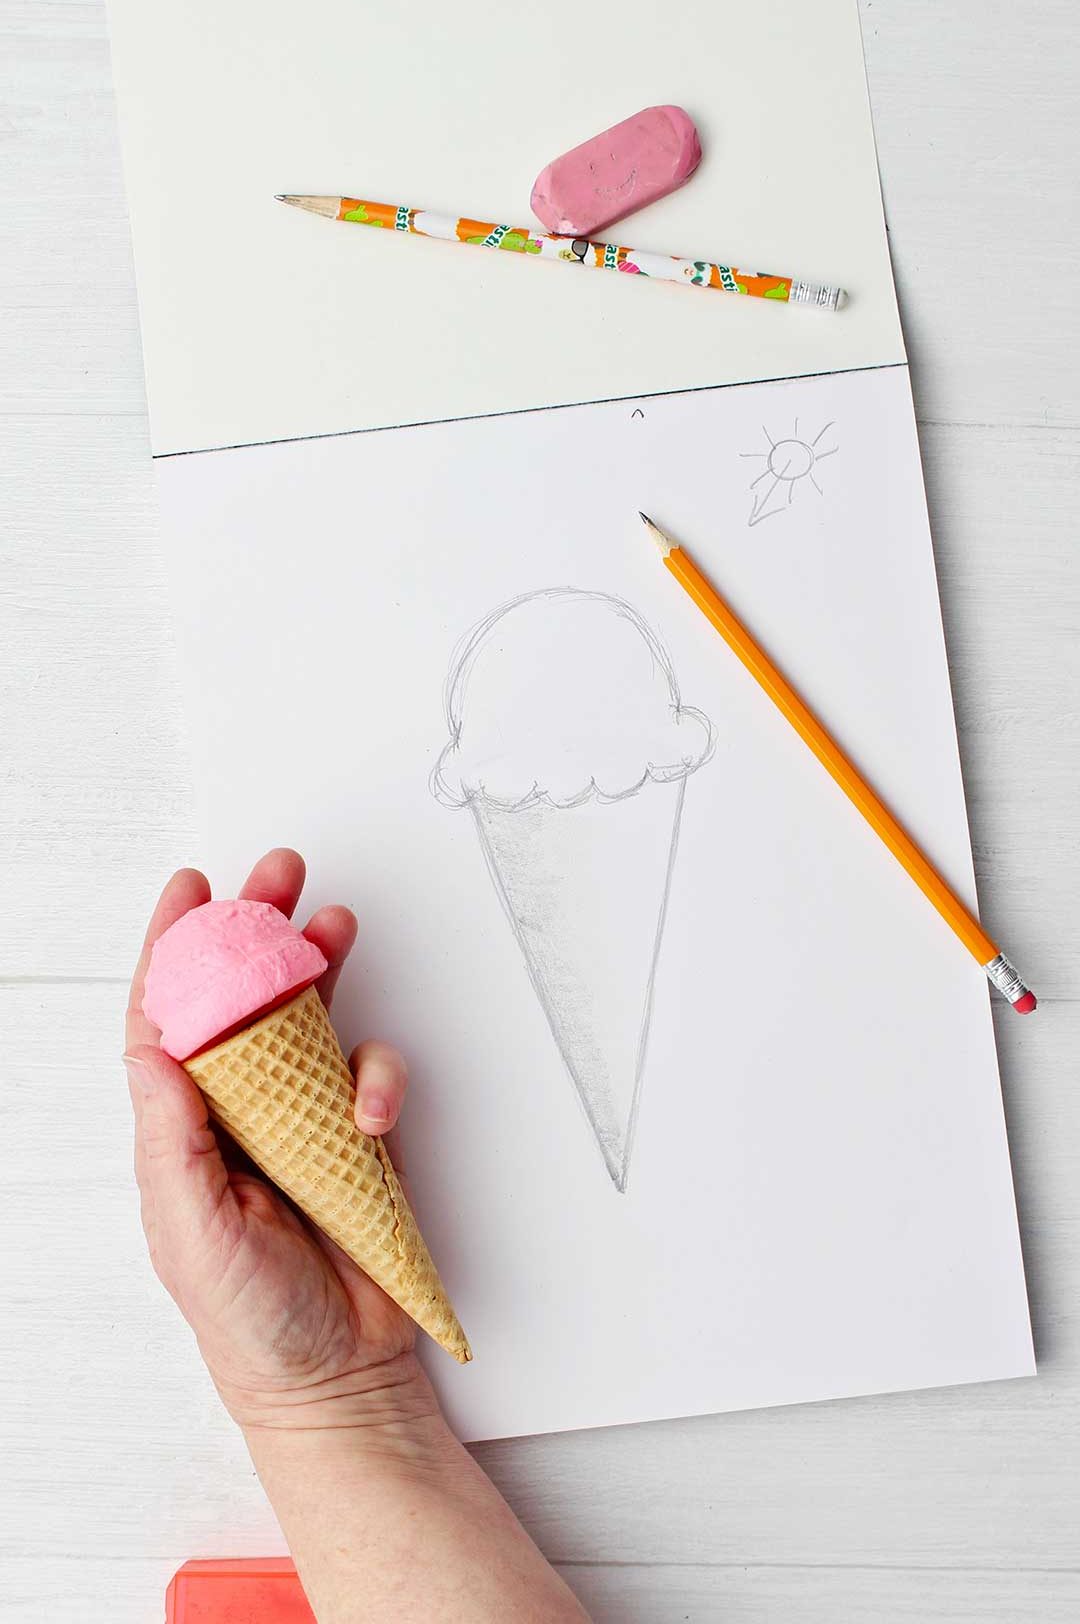 Hand holding a 3D ice cream cone comparing it to a quick sketch of an ice cream cone done in pencil.